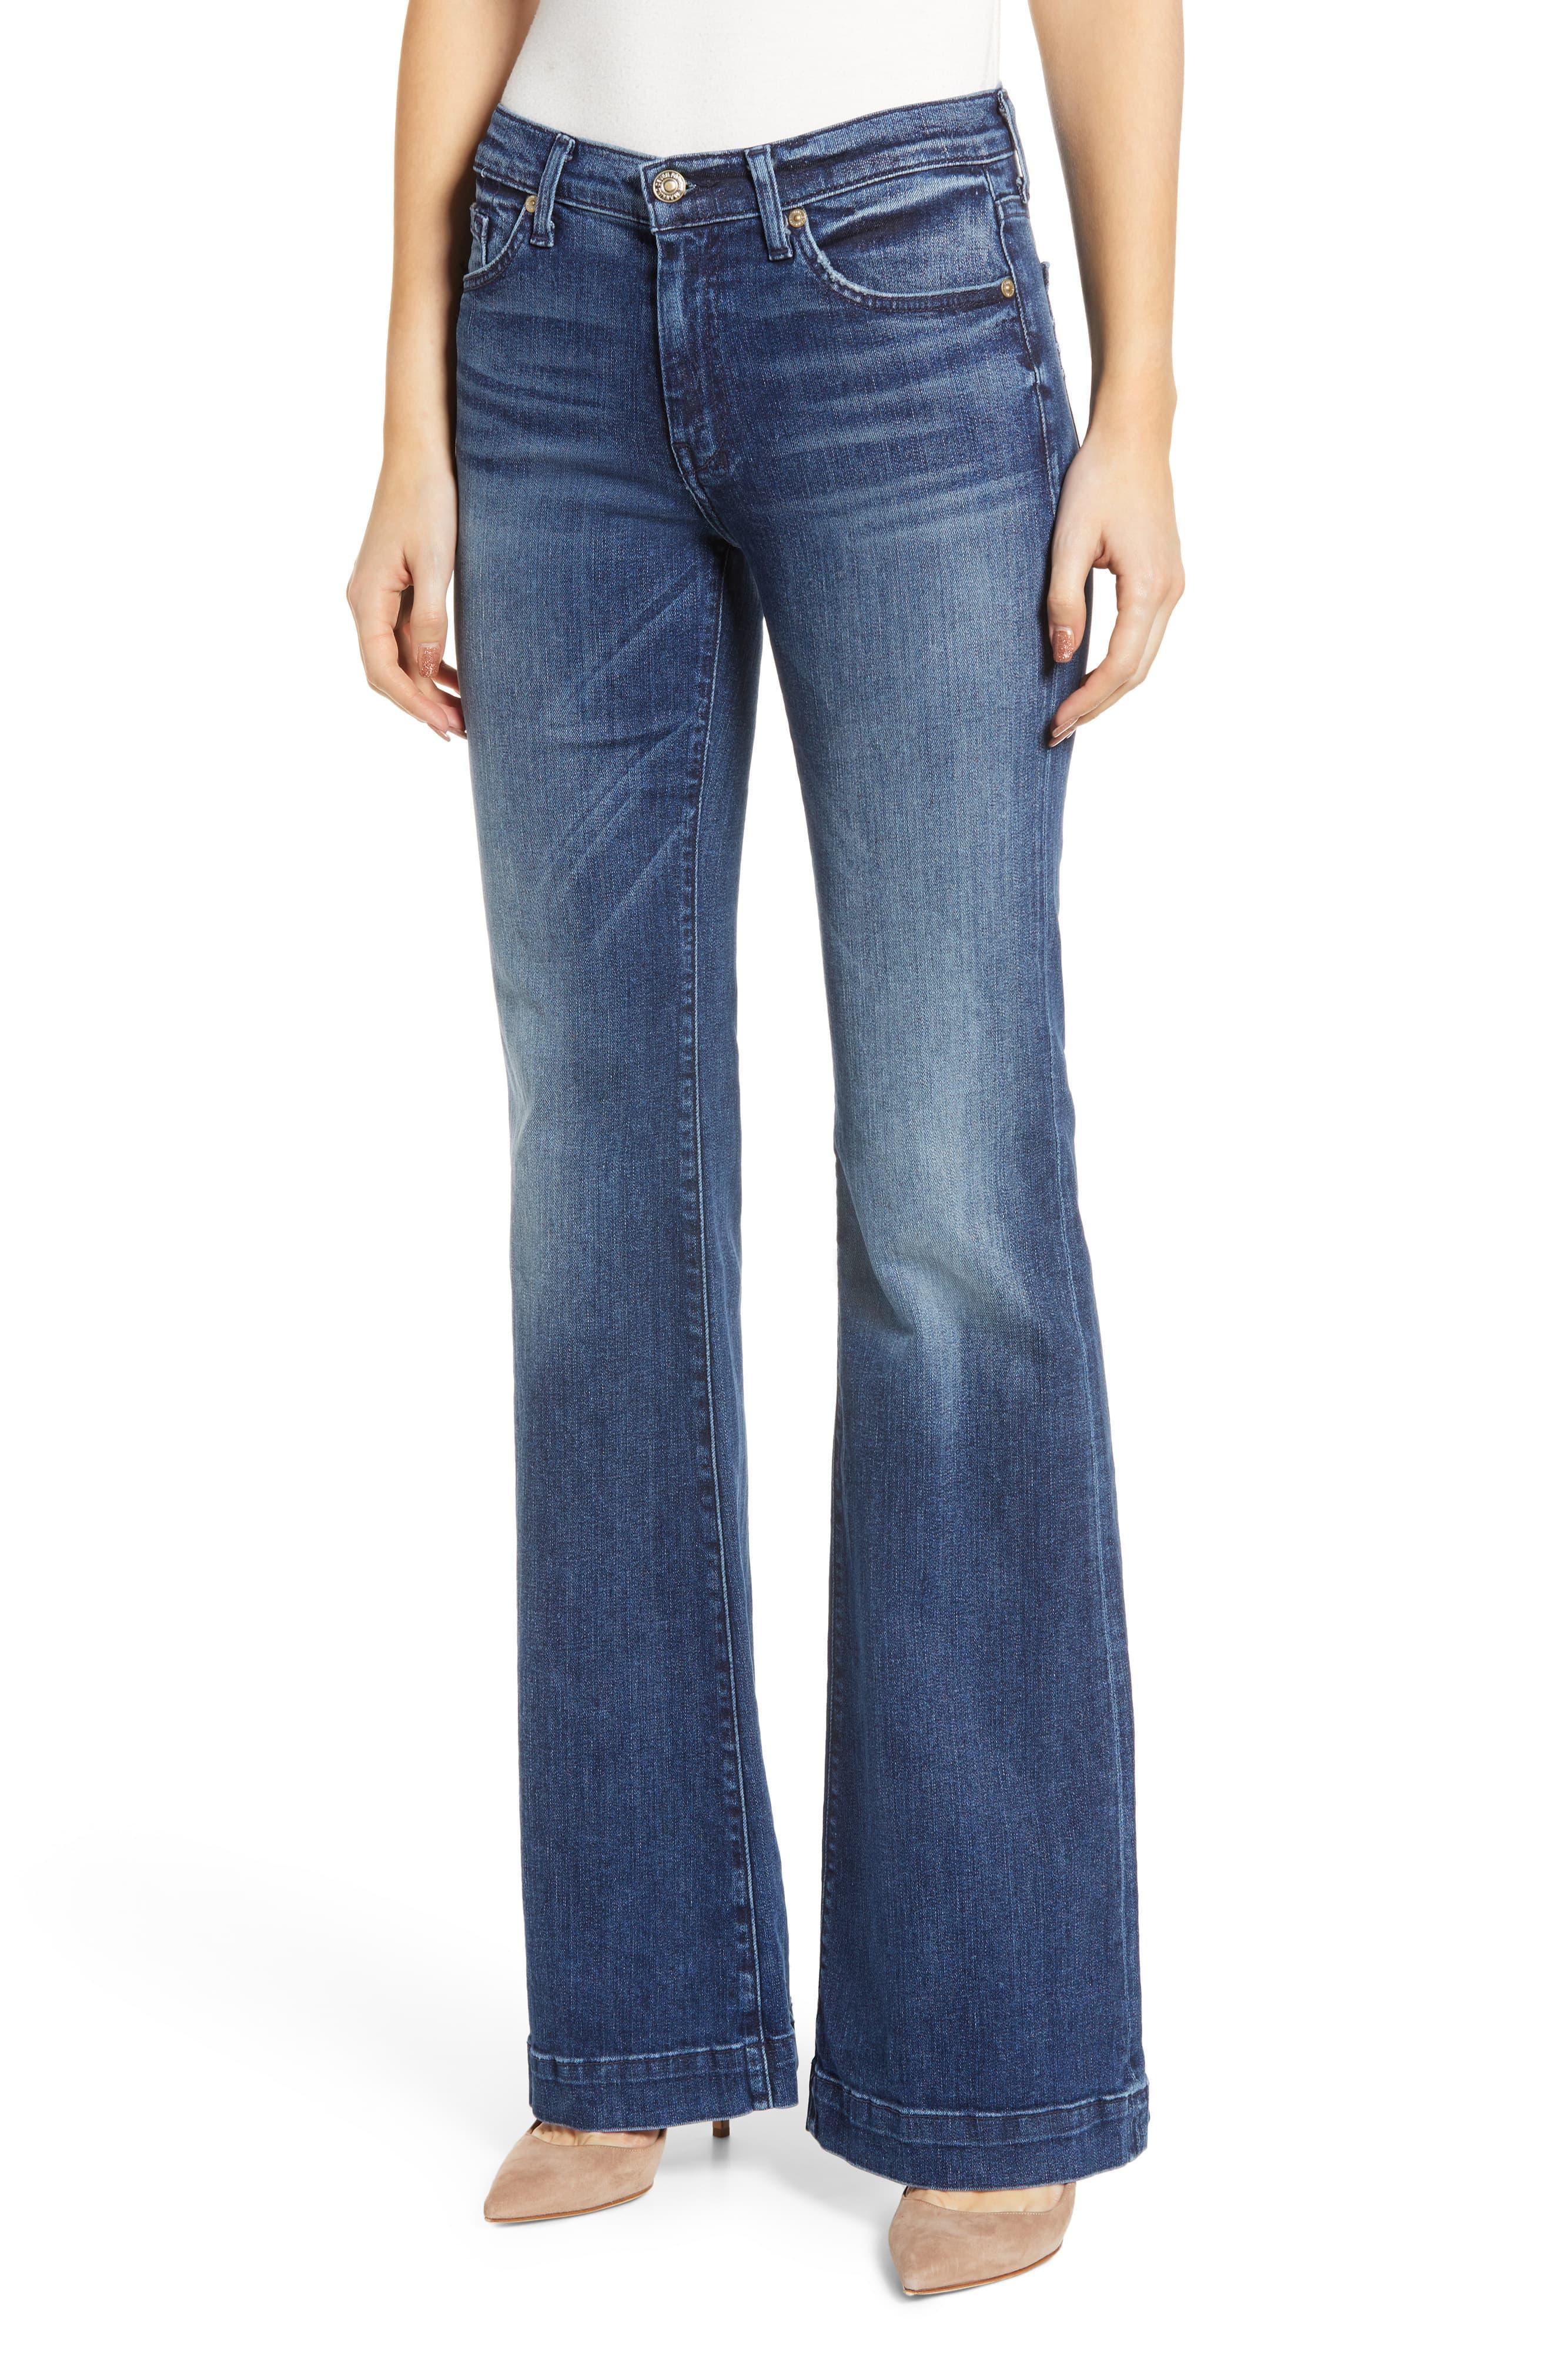 7 For All Mankind Denim 7 For All Mankind B(air) Dojo Trouser Jeans in ...